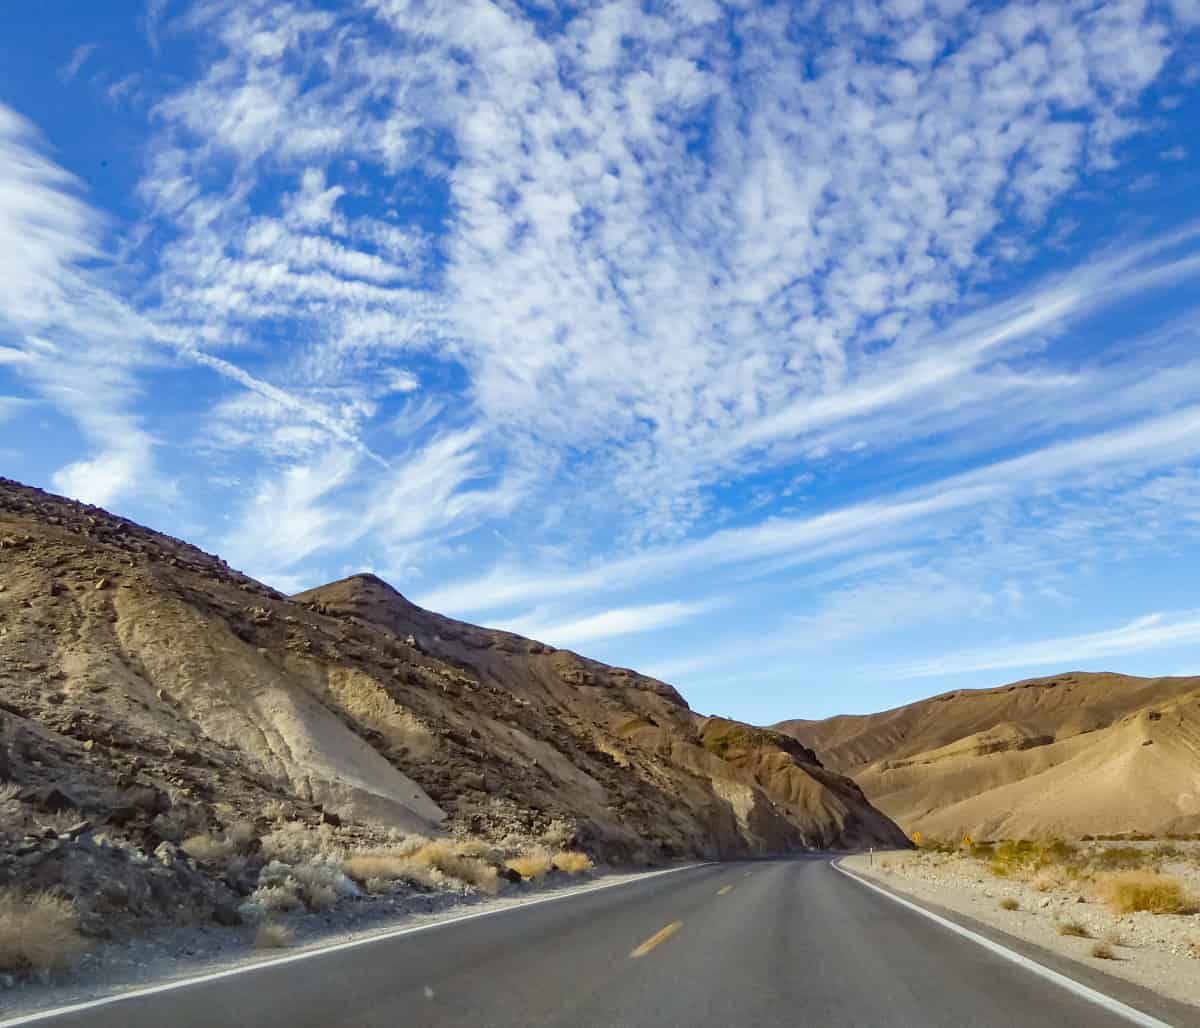 Driving to Death Valley National Park via Pahrump, Nevada